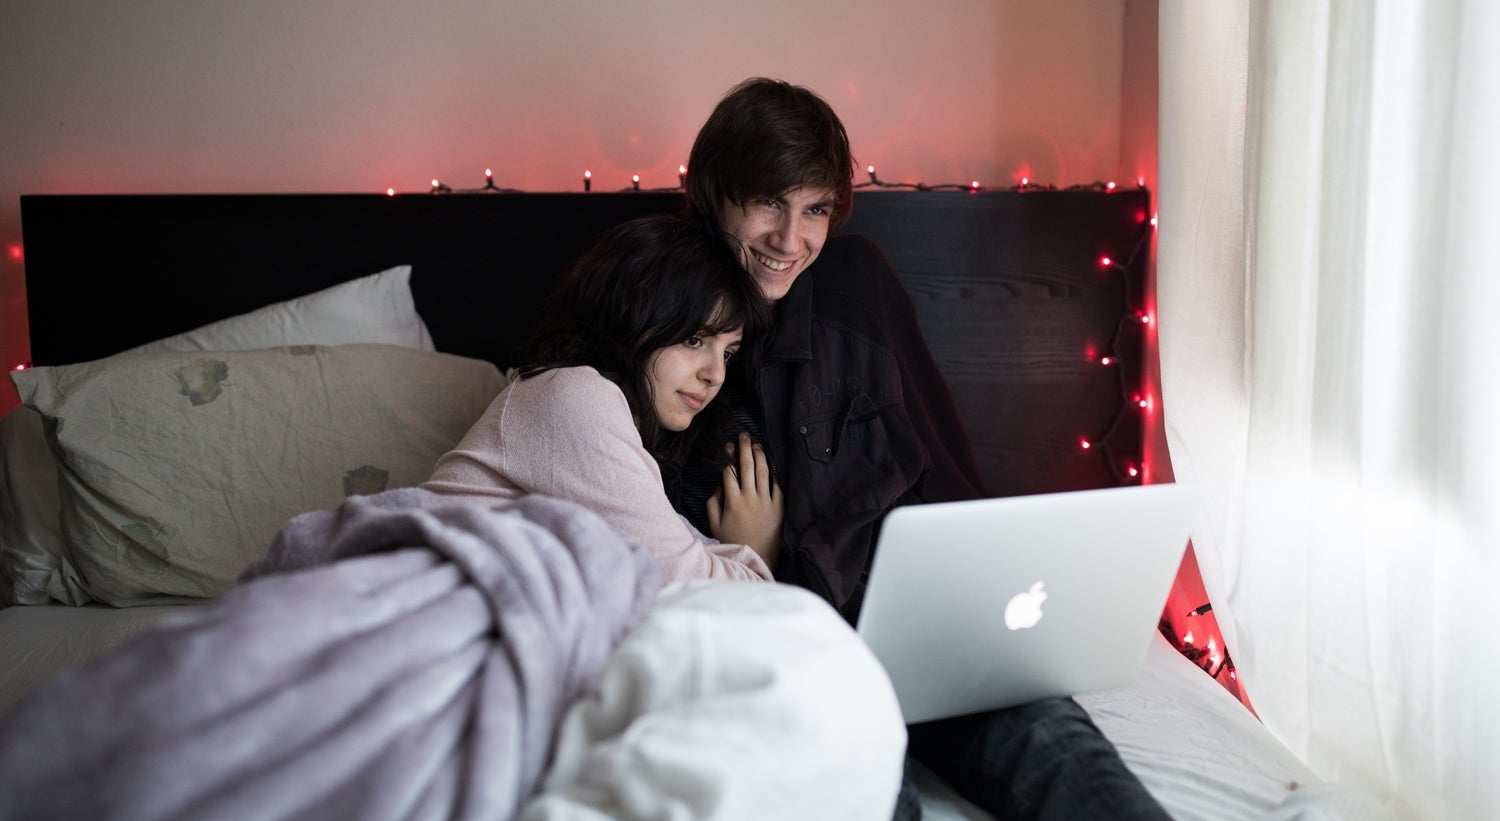 Two people cuddling in bed while watching Netflix or something else on a silver Macbook laptop.